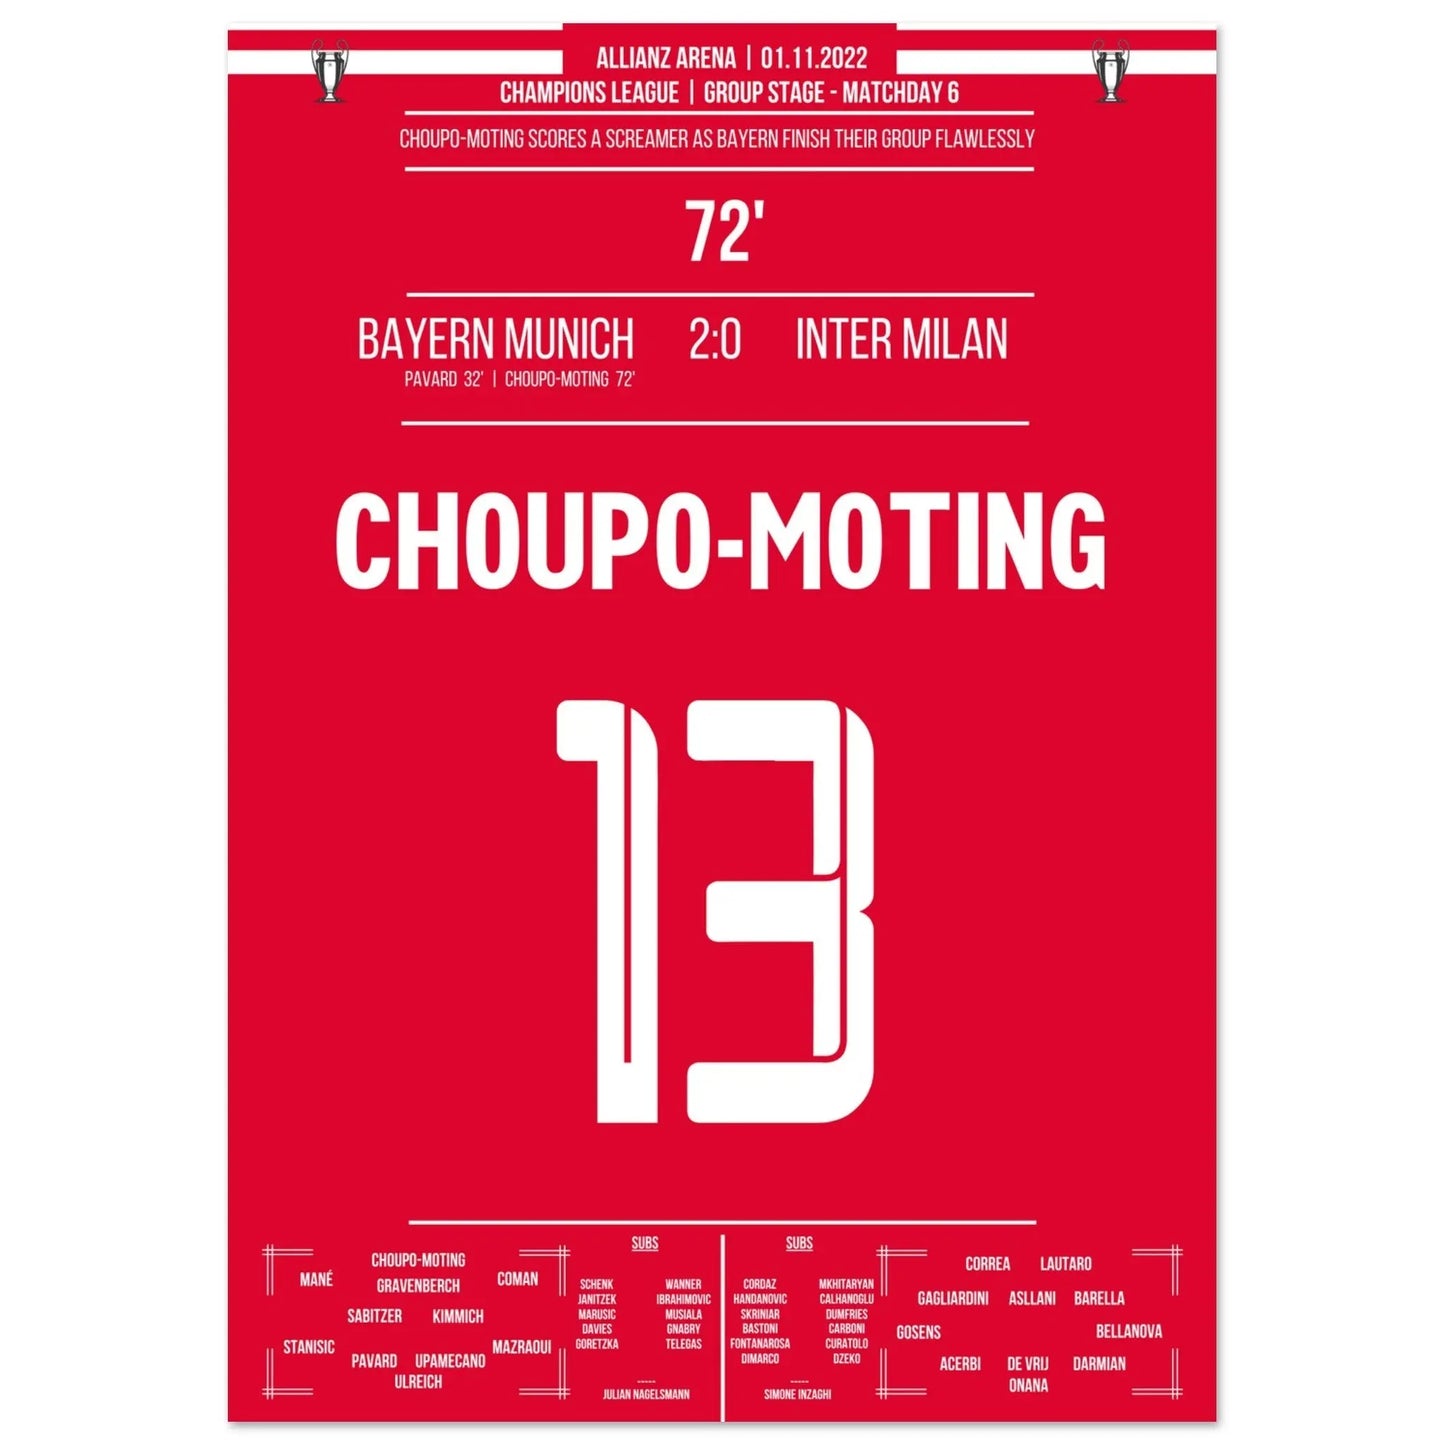 Choupo-Moting dream goal against Inter in the Champions League group stage 2022